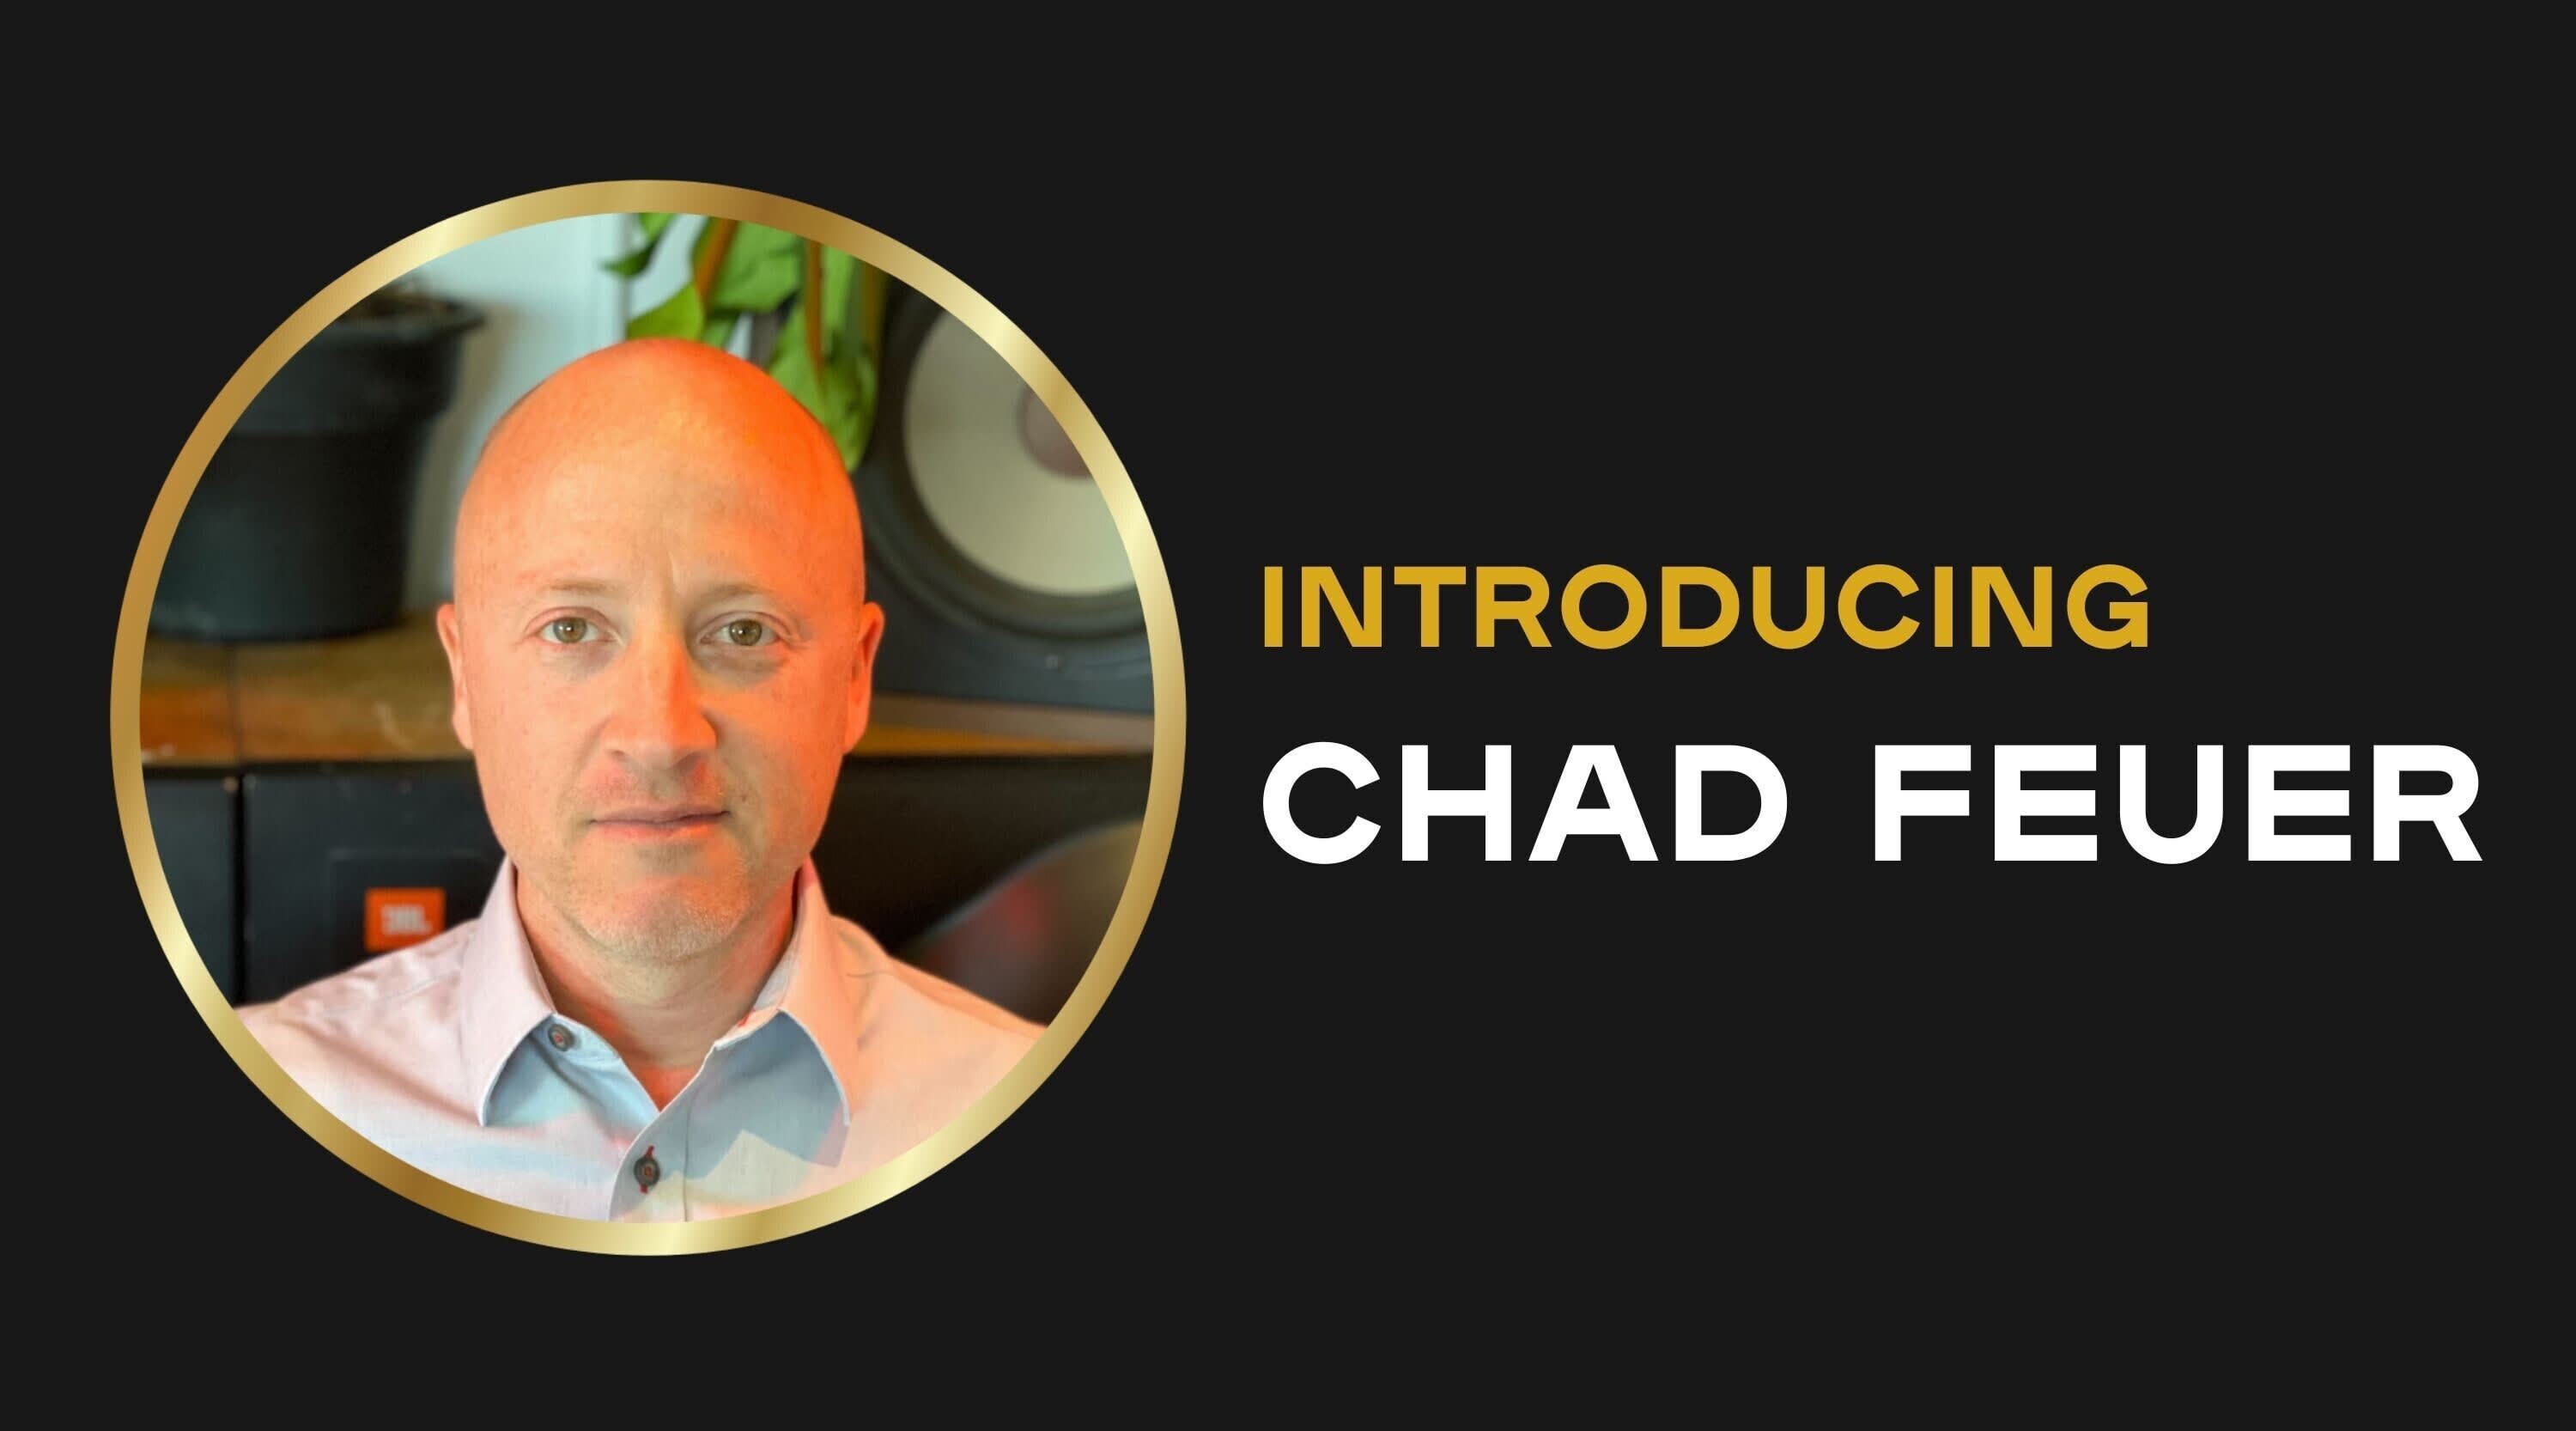 Welcome Chad Feuer